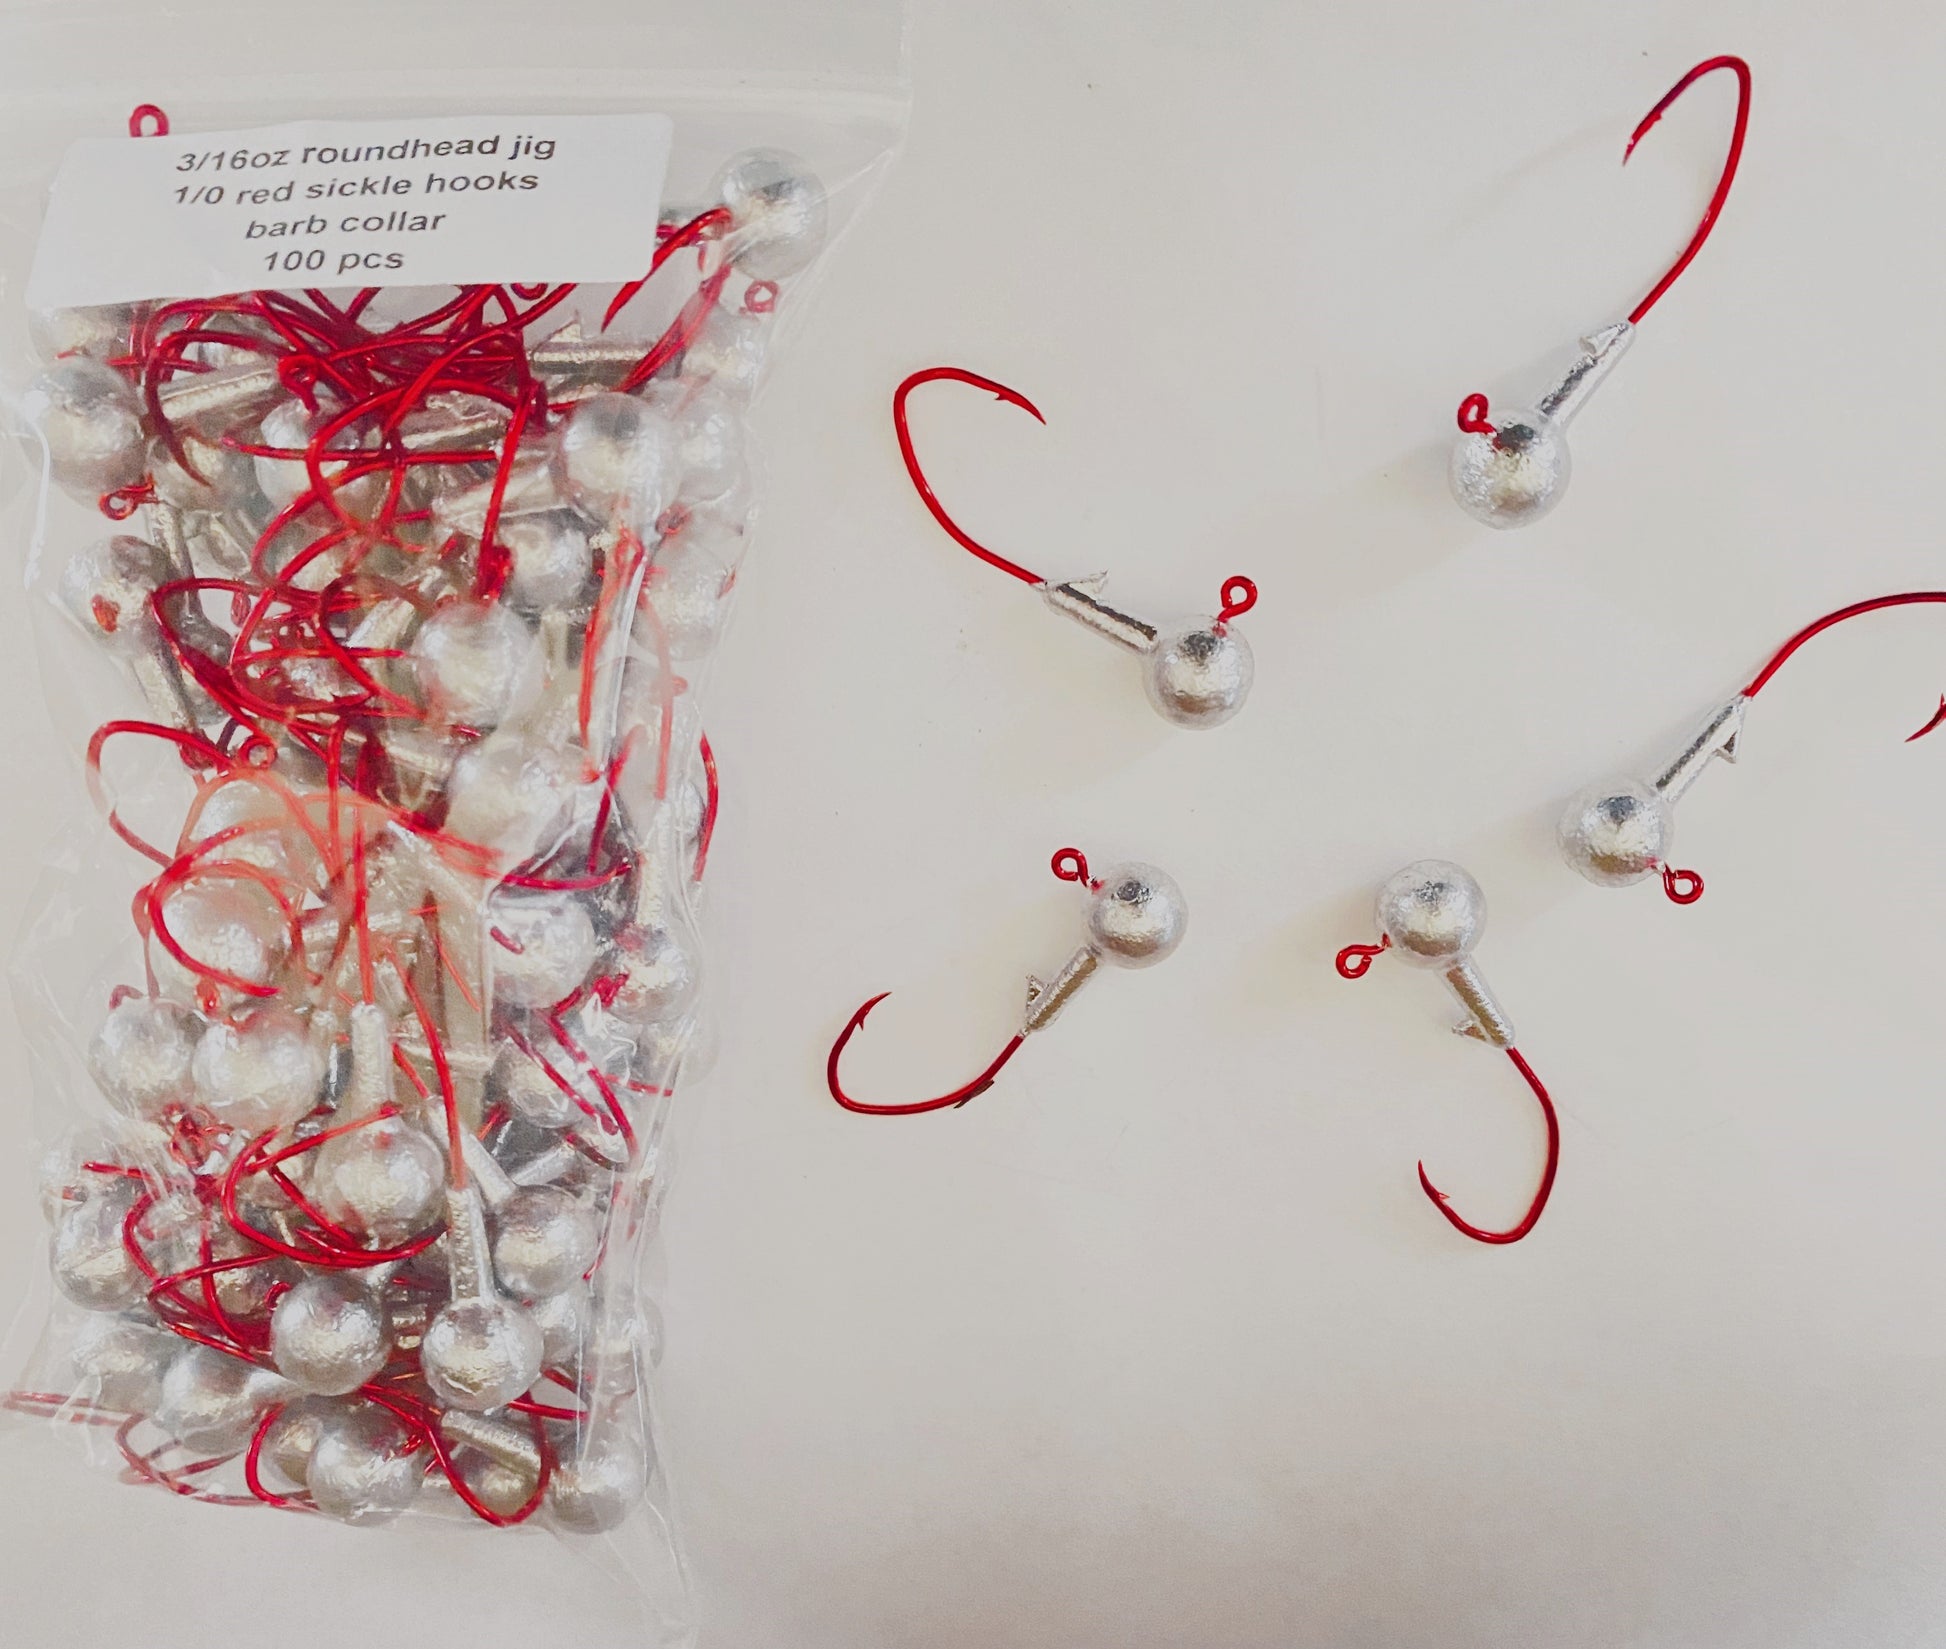 3/16 oz round head barbed collar jigs with 1/0 red sickle hook 100